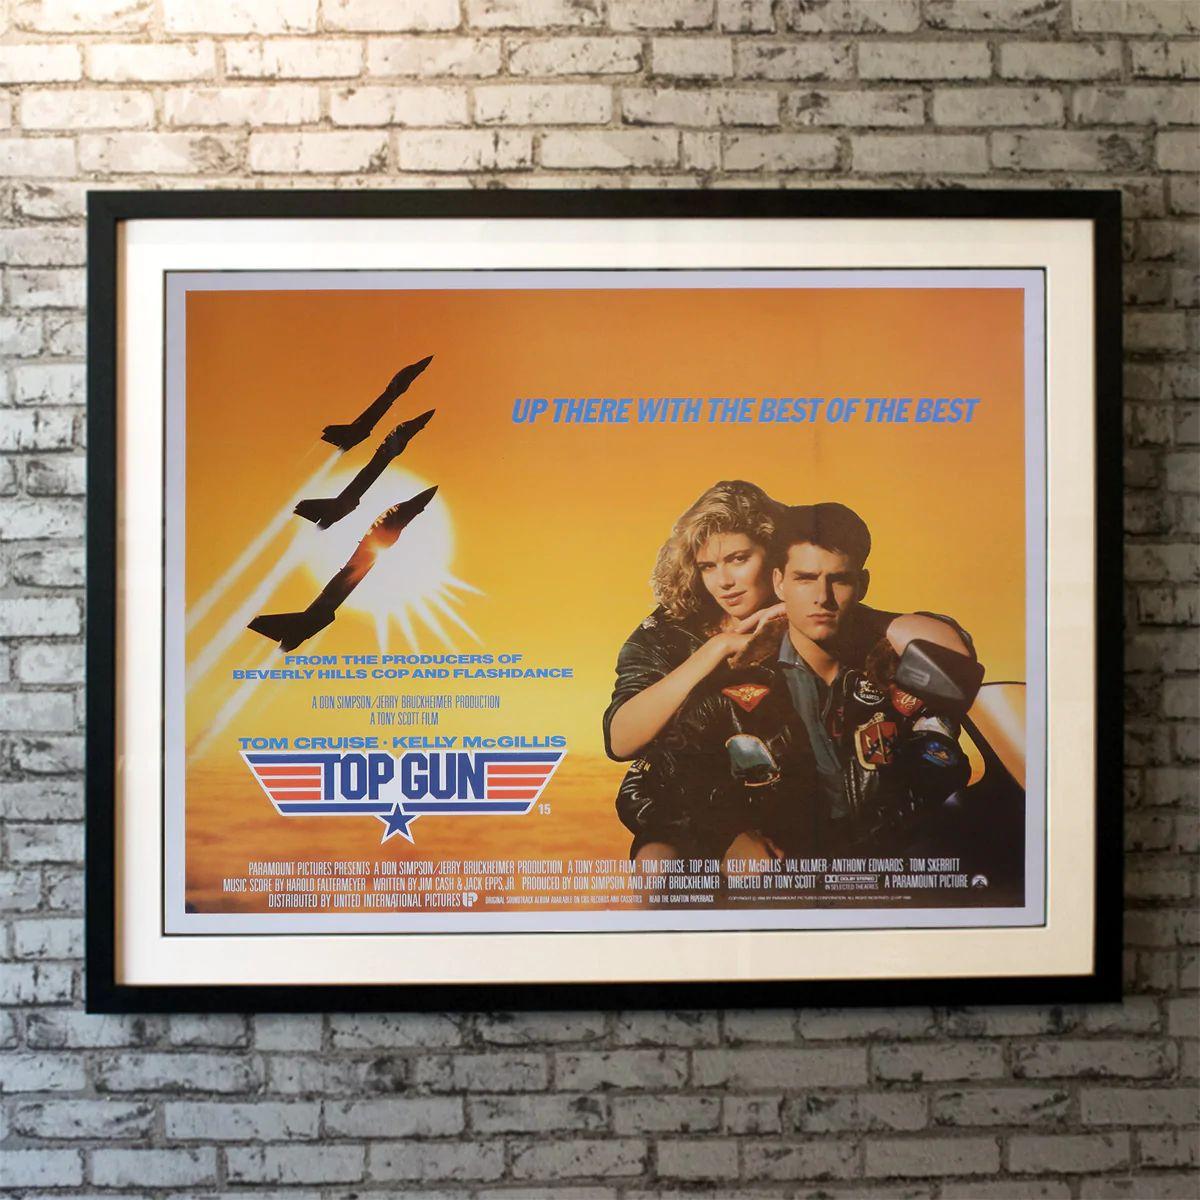 Top Gun, Unframed Poster, 1986

Fabulous & iconic 1980's poster created by Brian Bysouth. The Top Gun Naval Fighter Weapons School is where the best of the best train to refine their elite flying skills. When hotshot fighter pilot Maverick (Tom